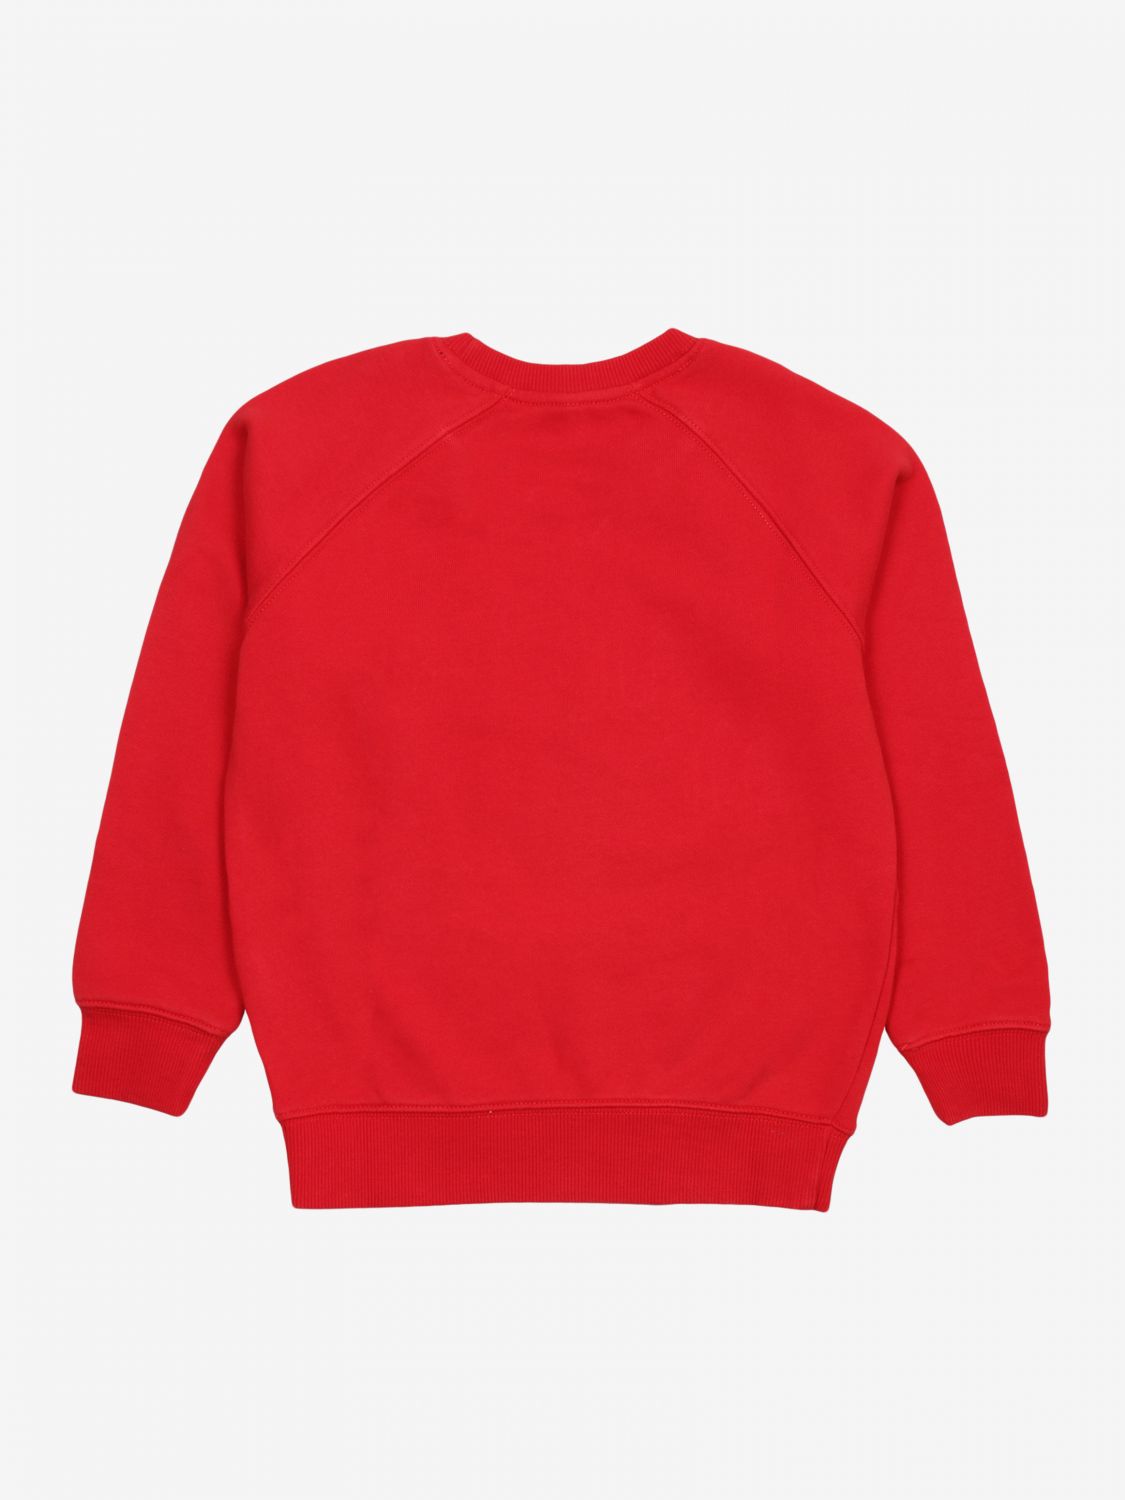 Sun 68 Outlet: sweater for boys - Red | Sun 68 sweater f1830710 online